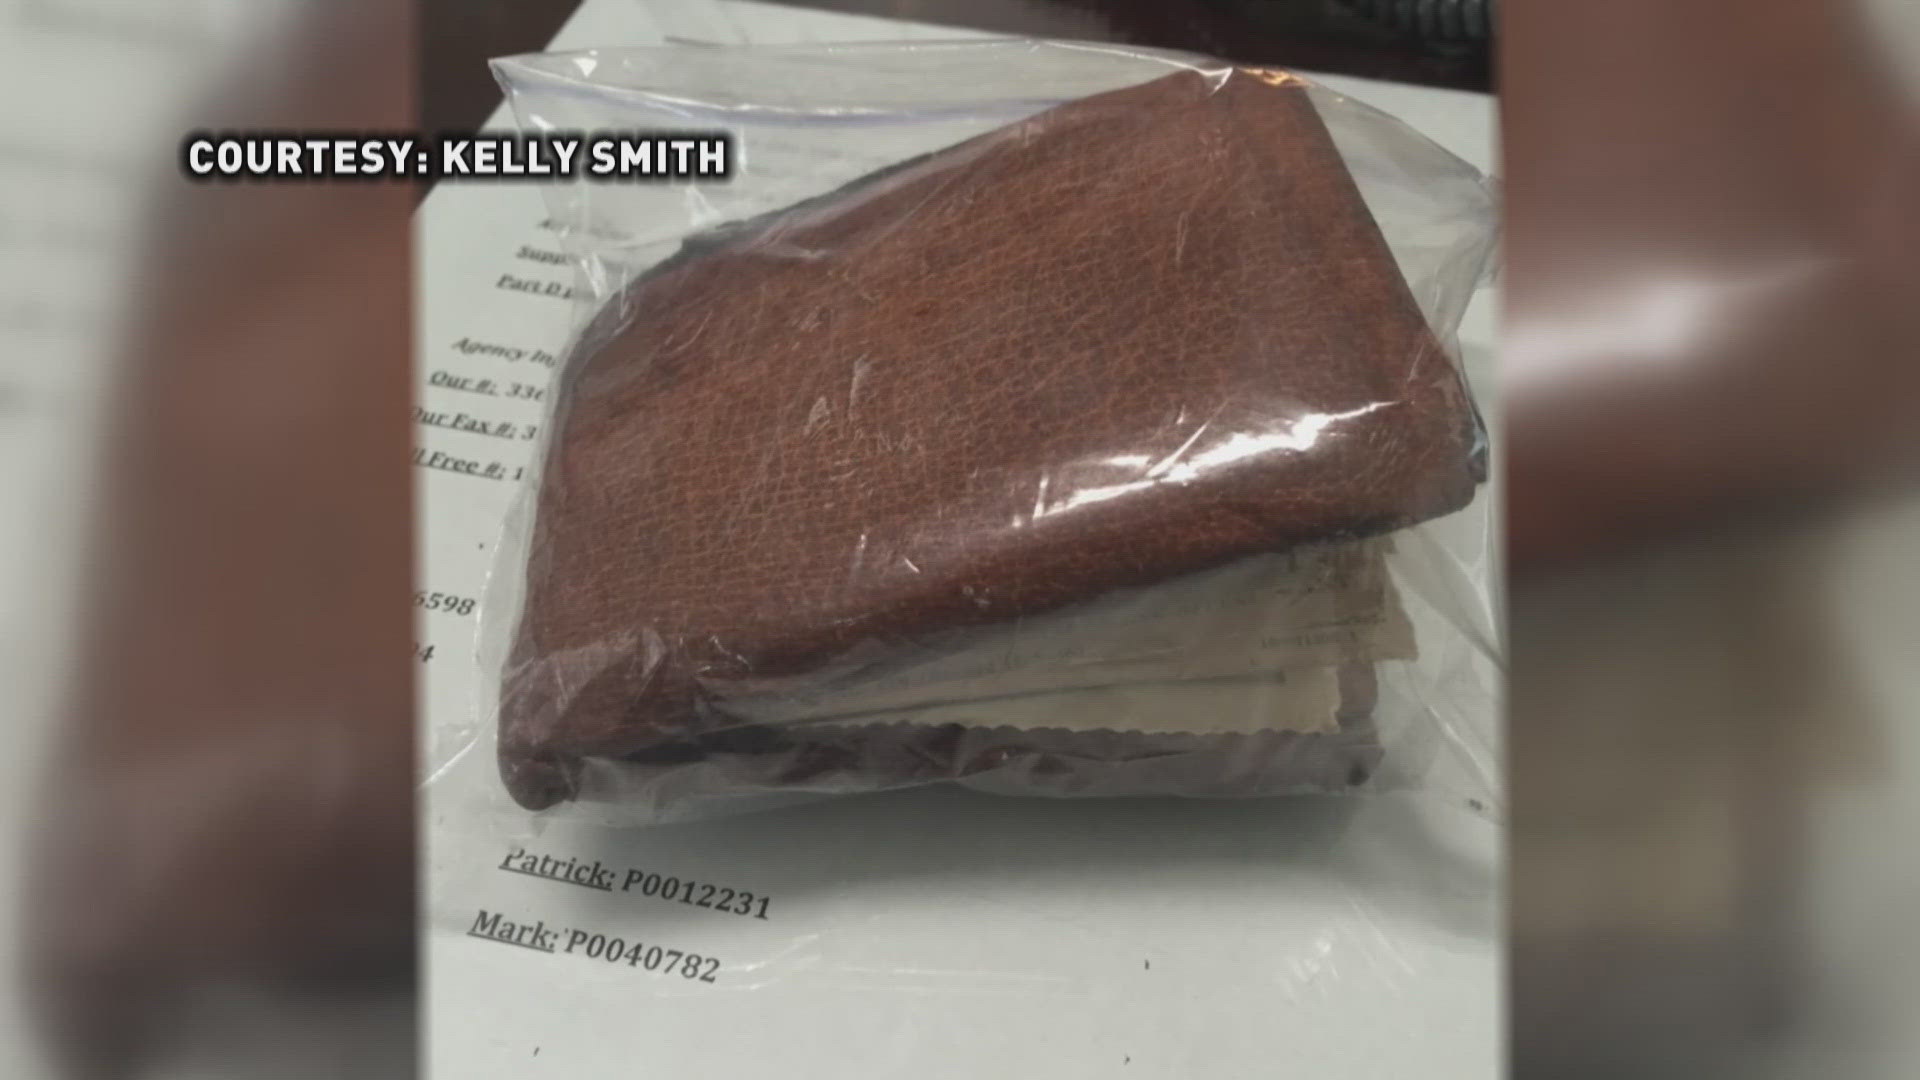 A Reidsville couple doing spring cleaning found a wallet in their ceiling on this day 8 years ago.